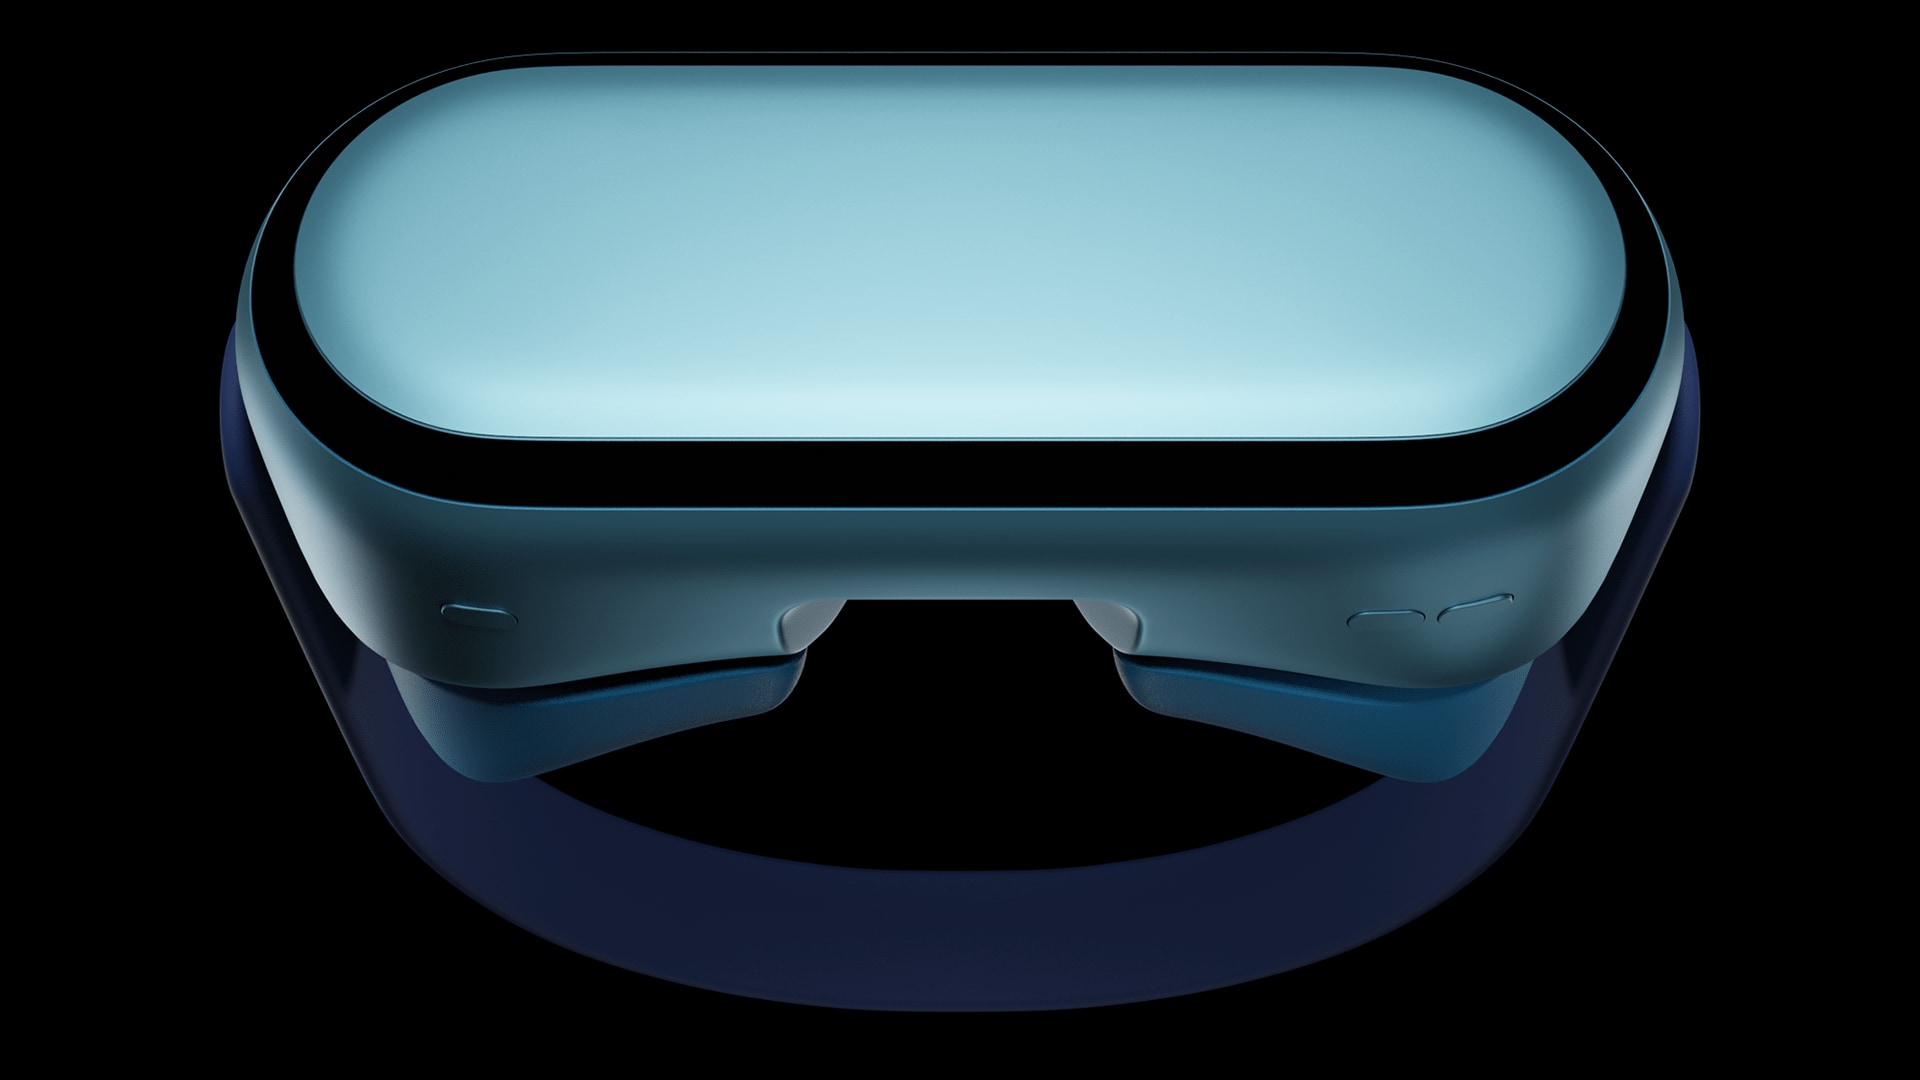 A head-worn mixed reality Apple headset device is imagined in this concept